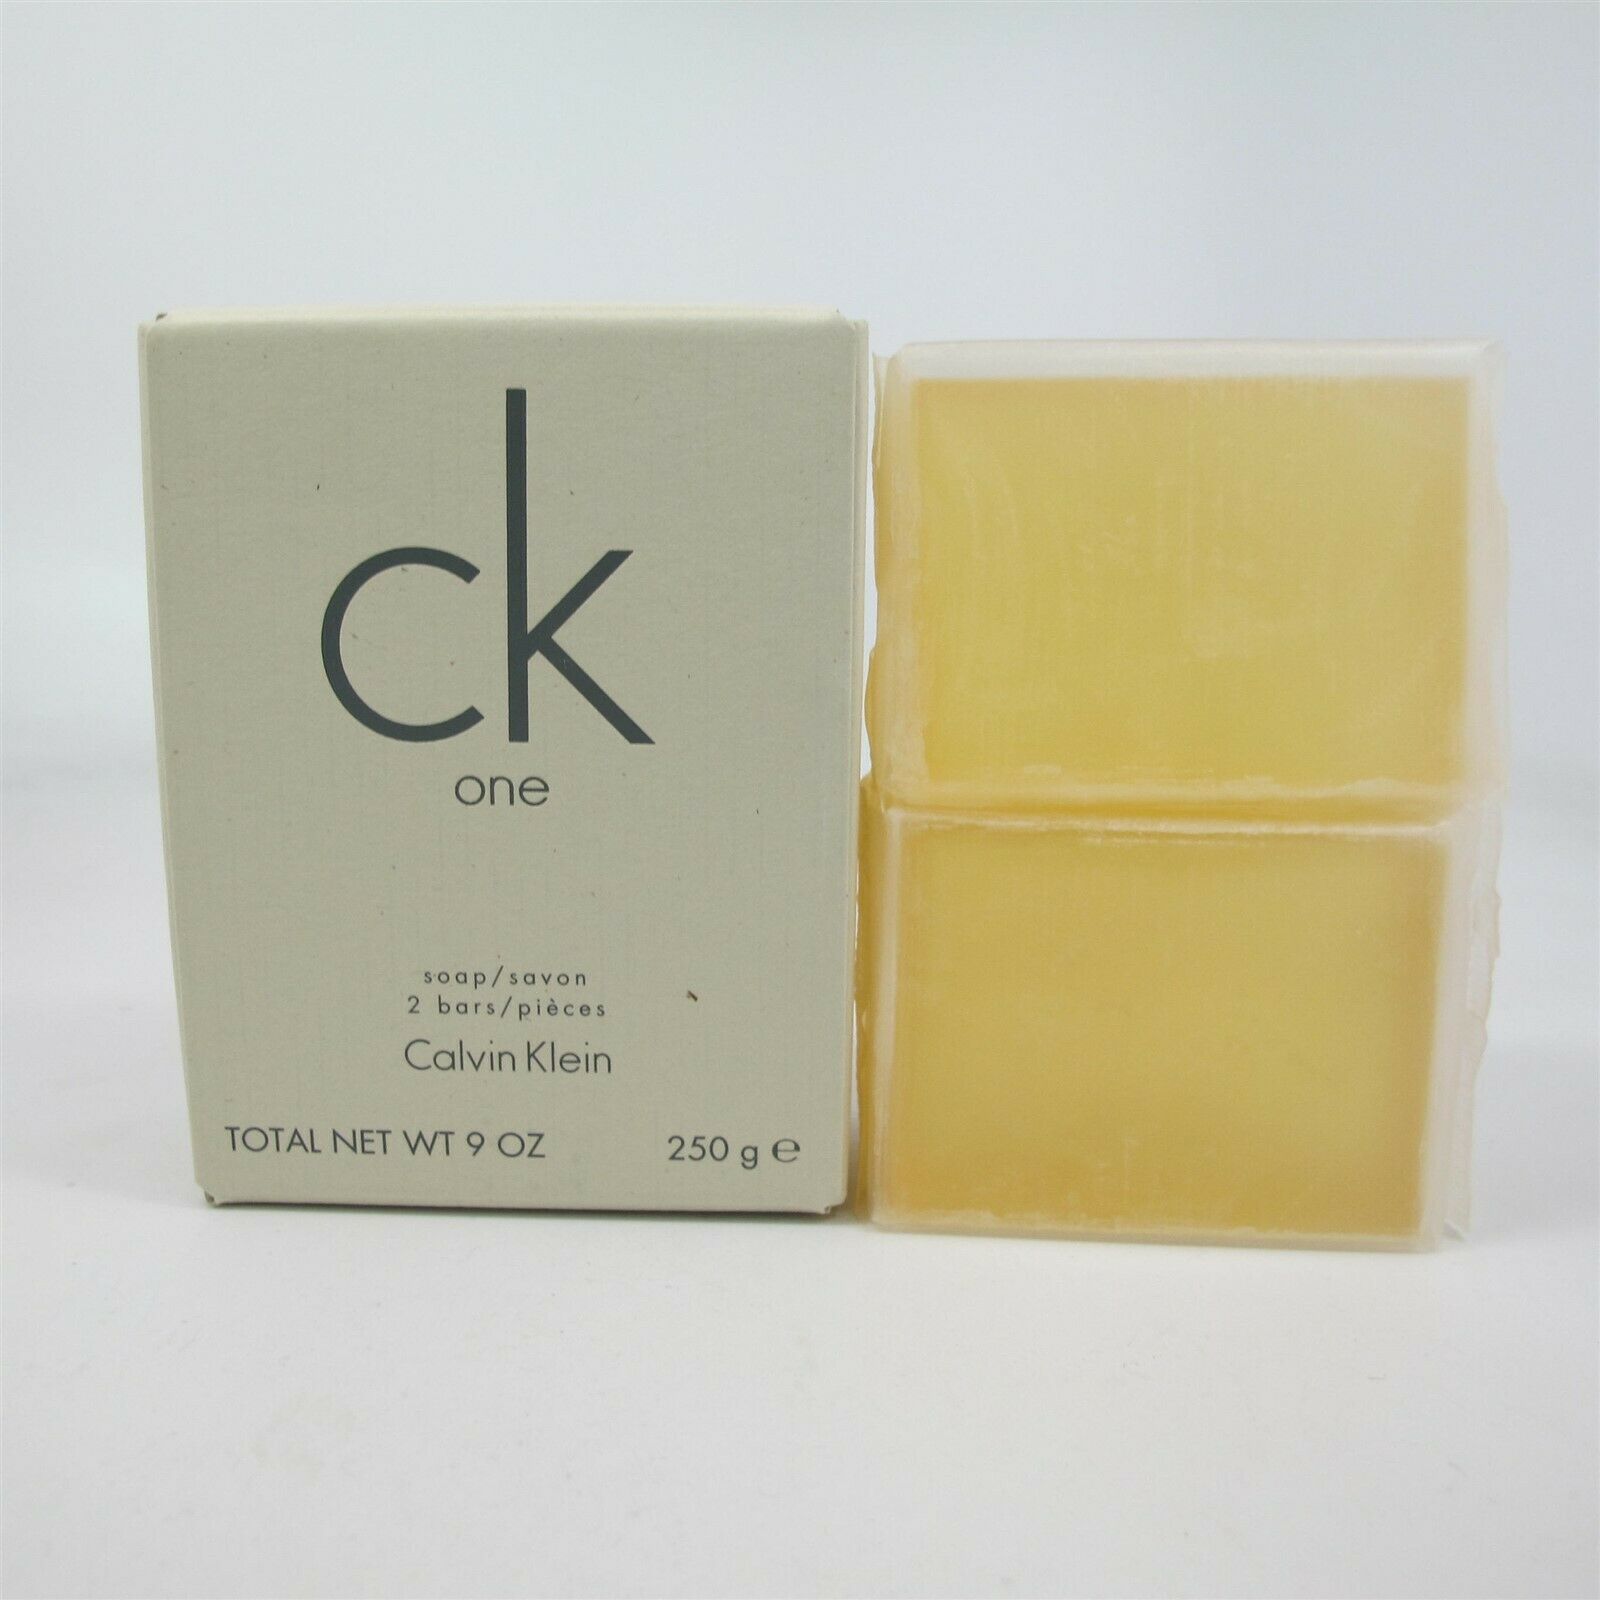 Primary image for CK ONE by Calvin Klein 250 g/ 9.0 oz Soap (2 BARS) NIB